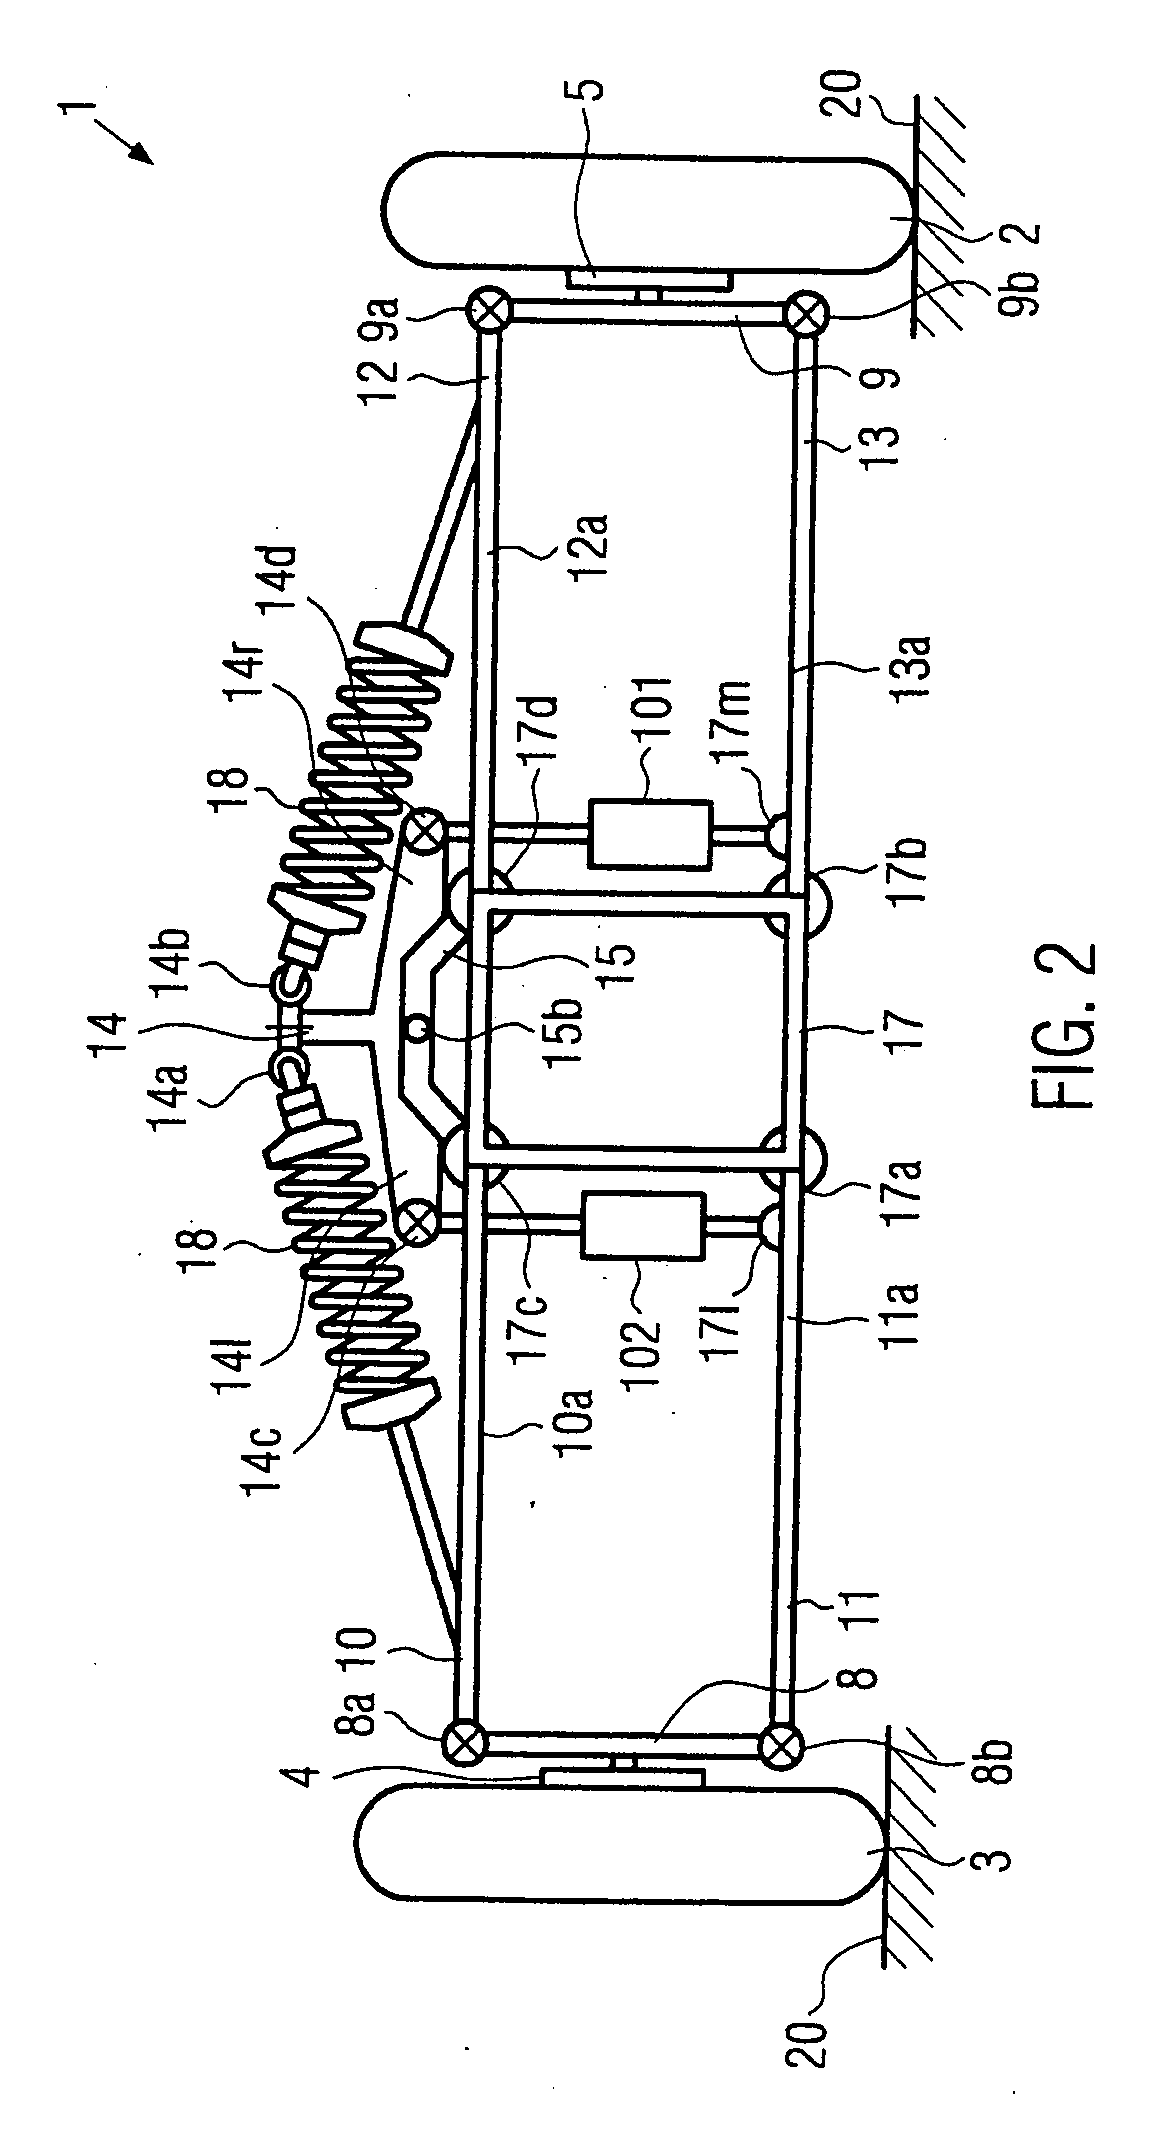 Suspension tilting module for a wheeled vehicle and a wheeled vehicle equipped with said suspension tilting module